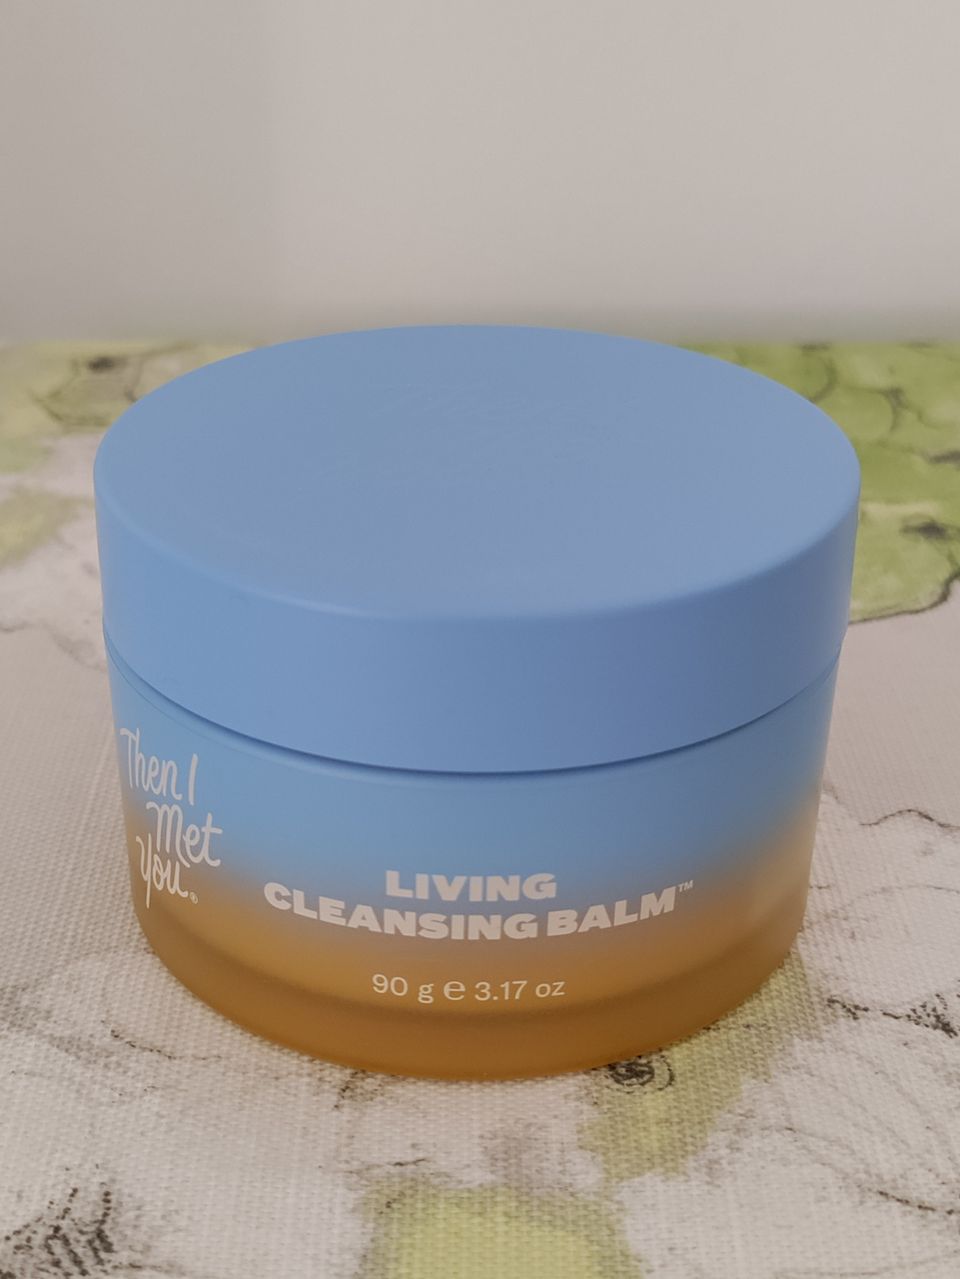 Then I met you cleansing balm 90g